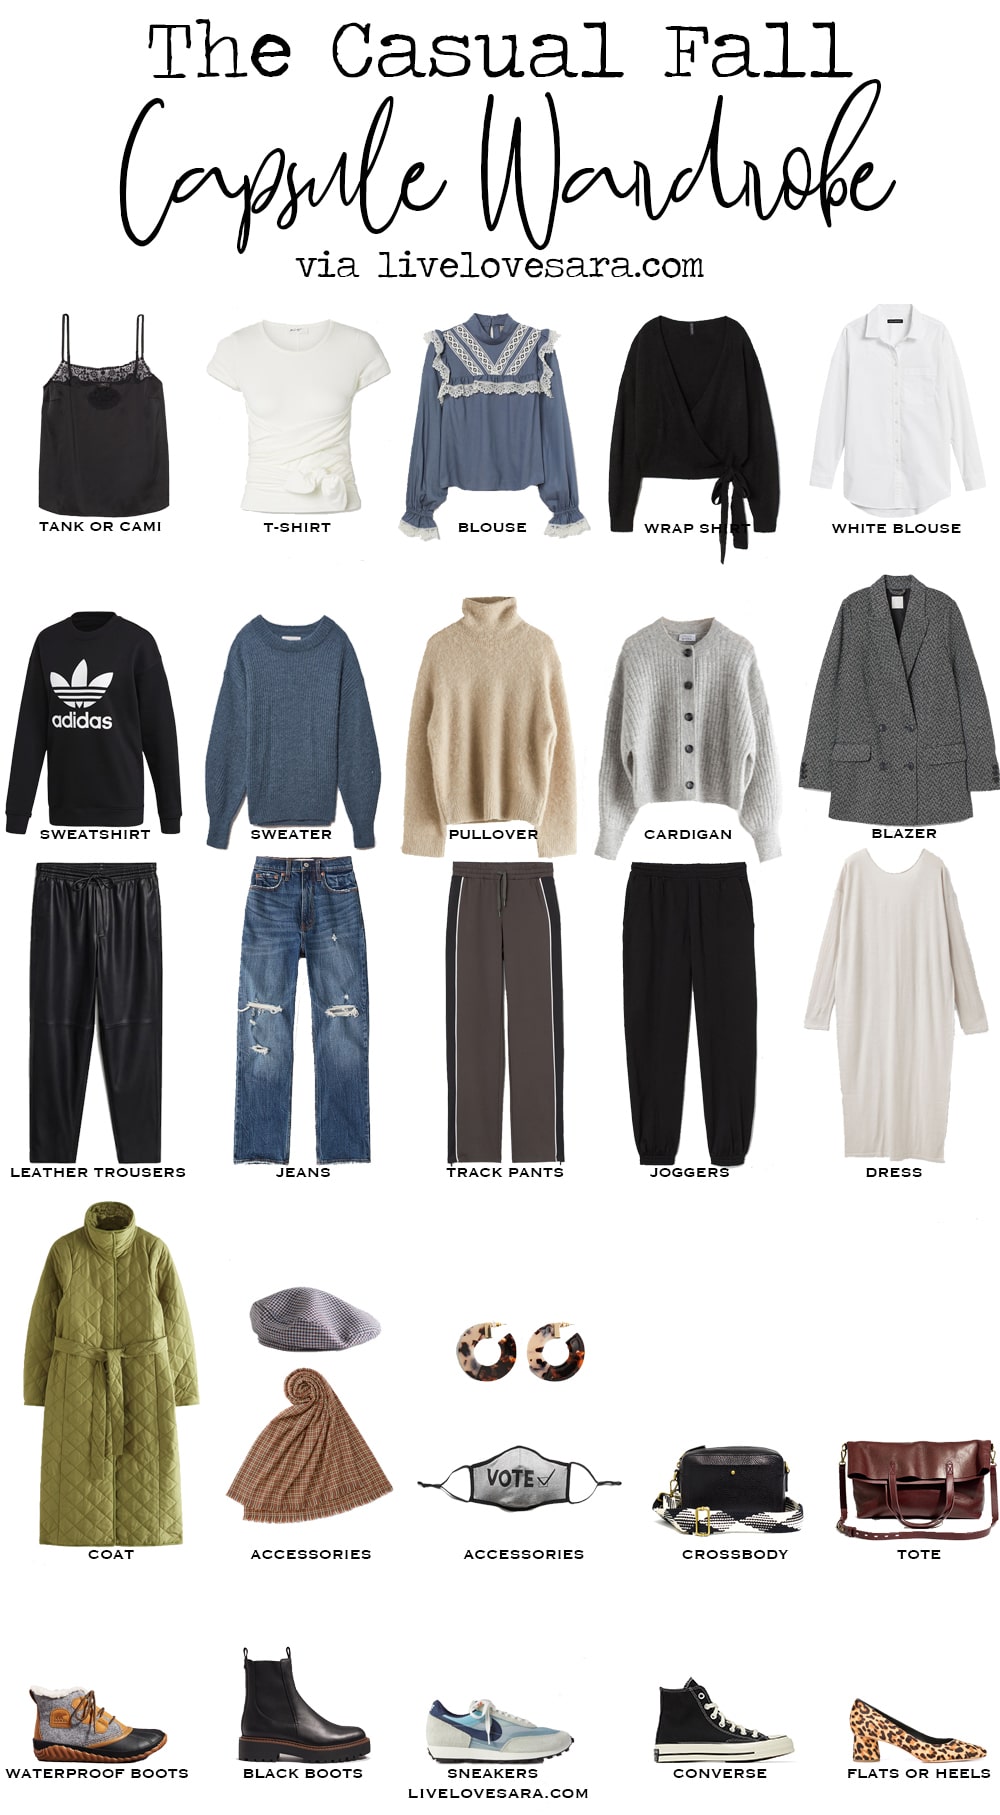 The Casual Fall Capsule Wardrobe and Casual Outfit Ideas